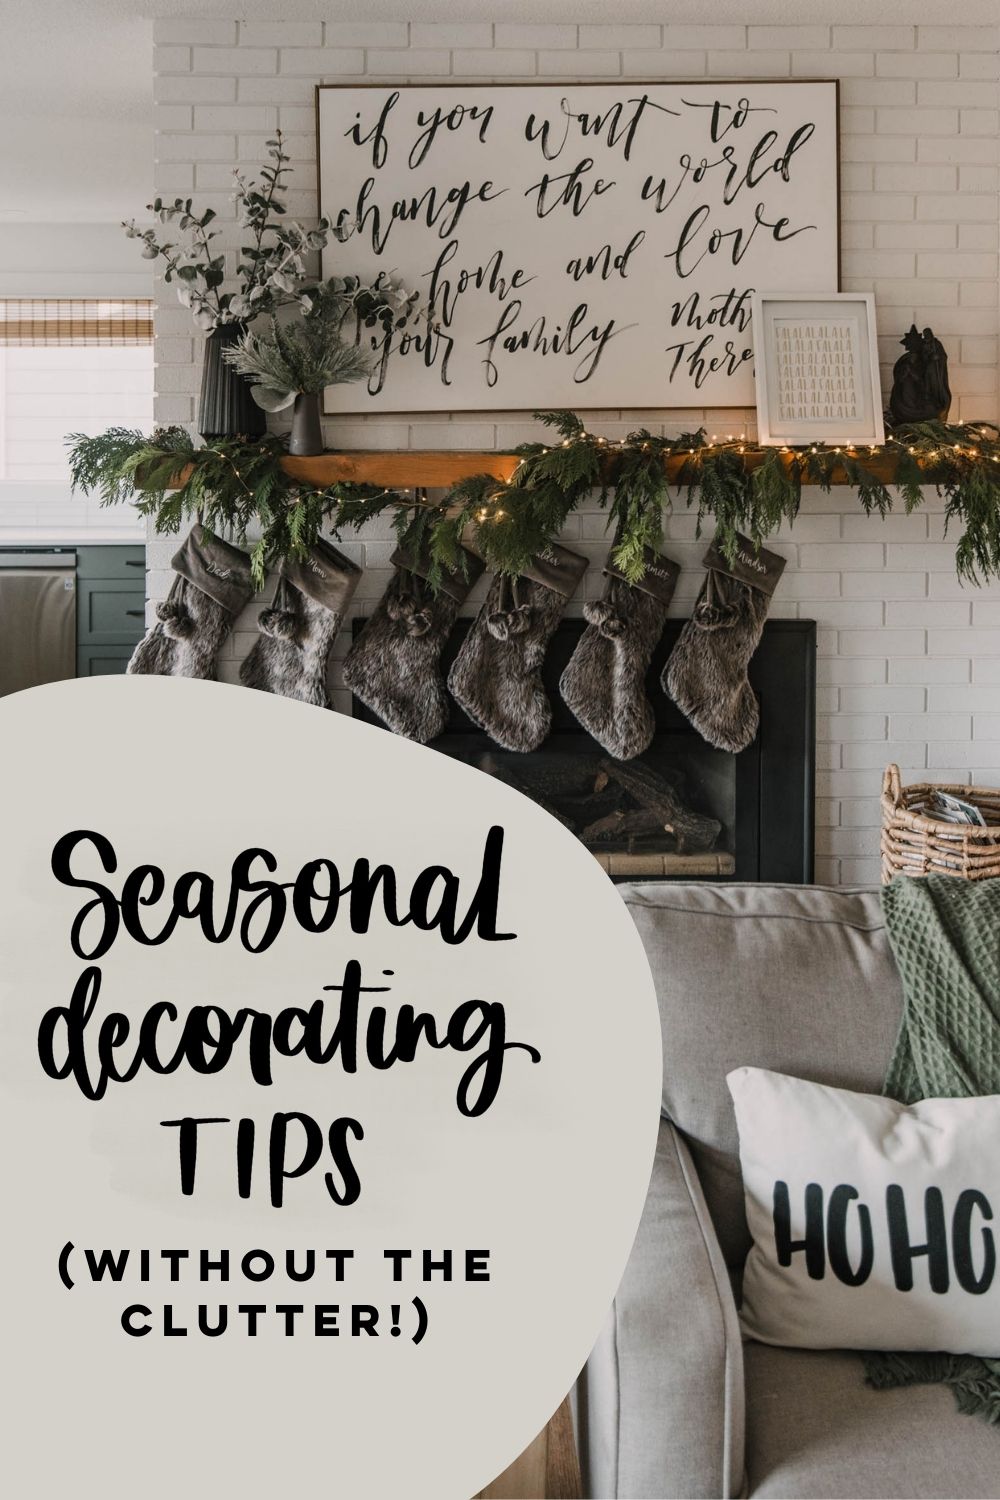 Seasonal Decorating Tips (without the clutter!)